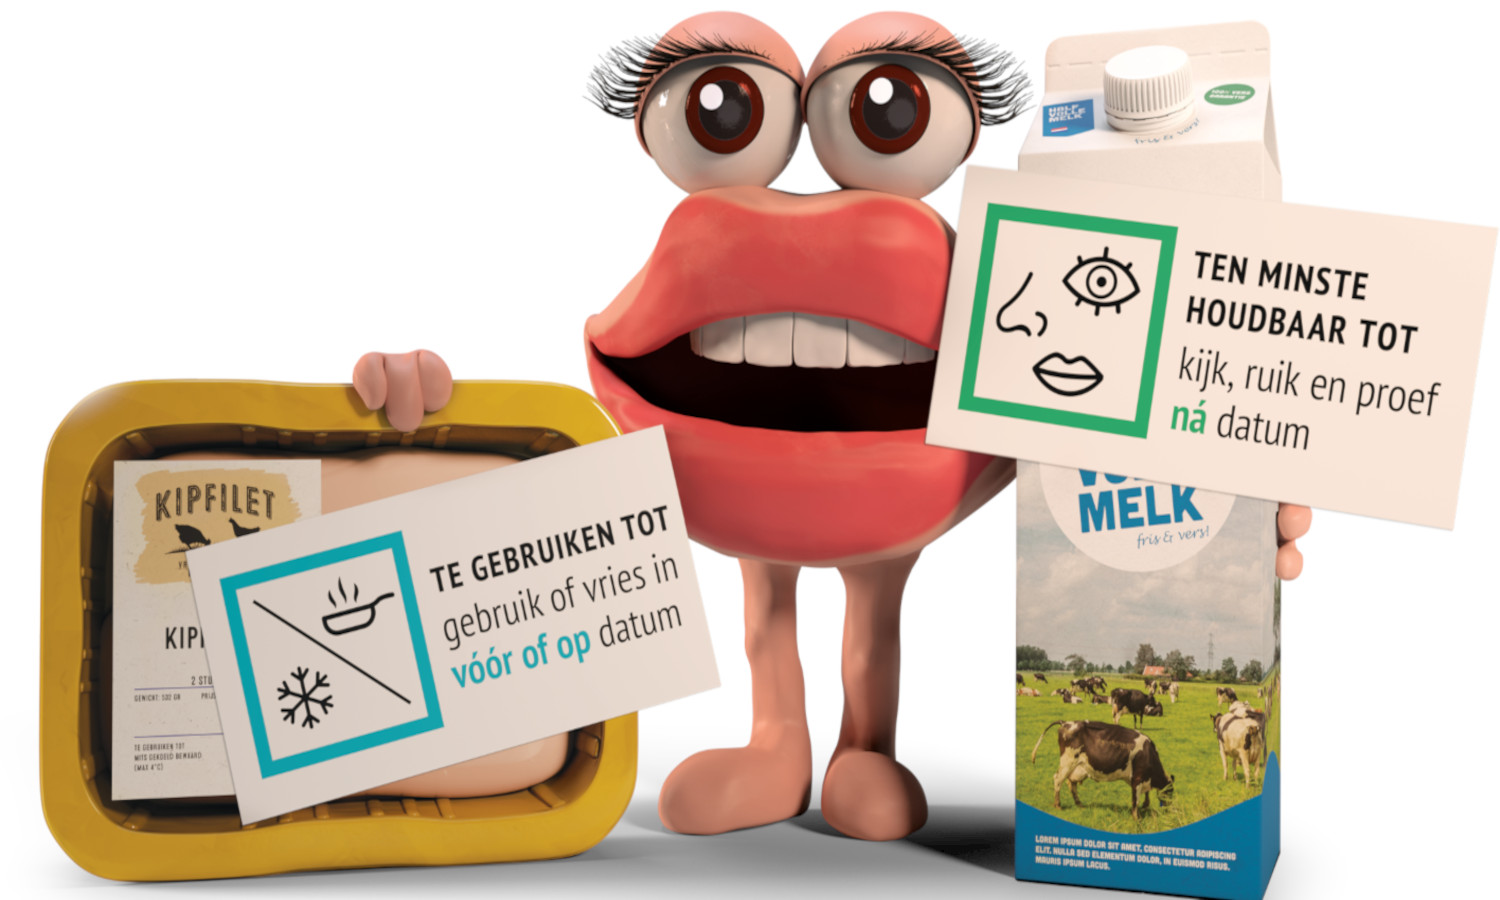 To reduce consumer food waste, the Netherlands launches a public awareness campaign to inform consumers on their food labels.